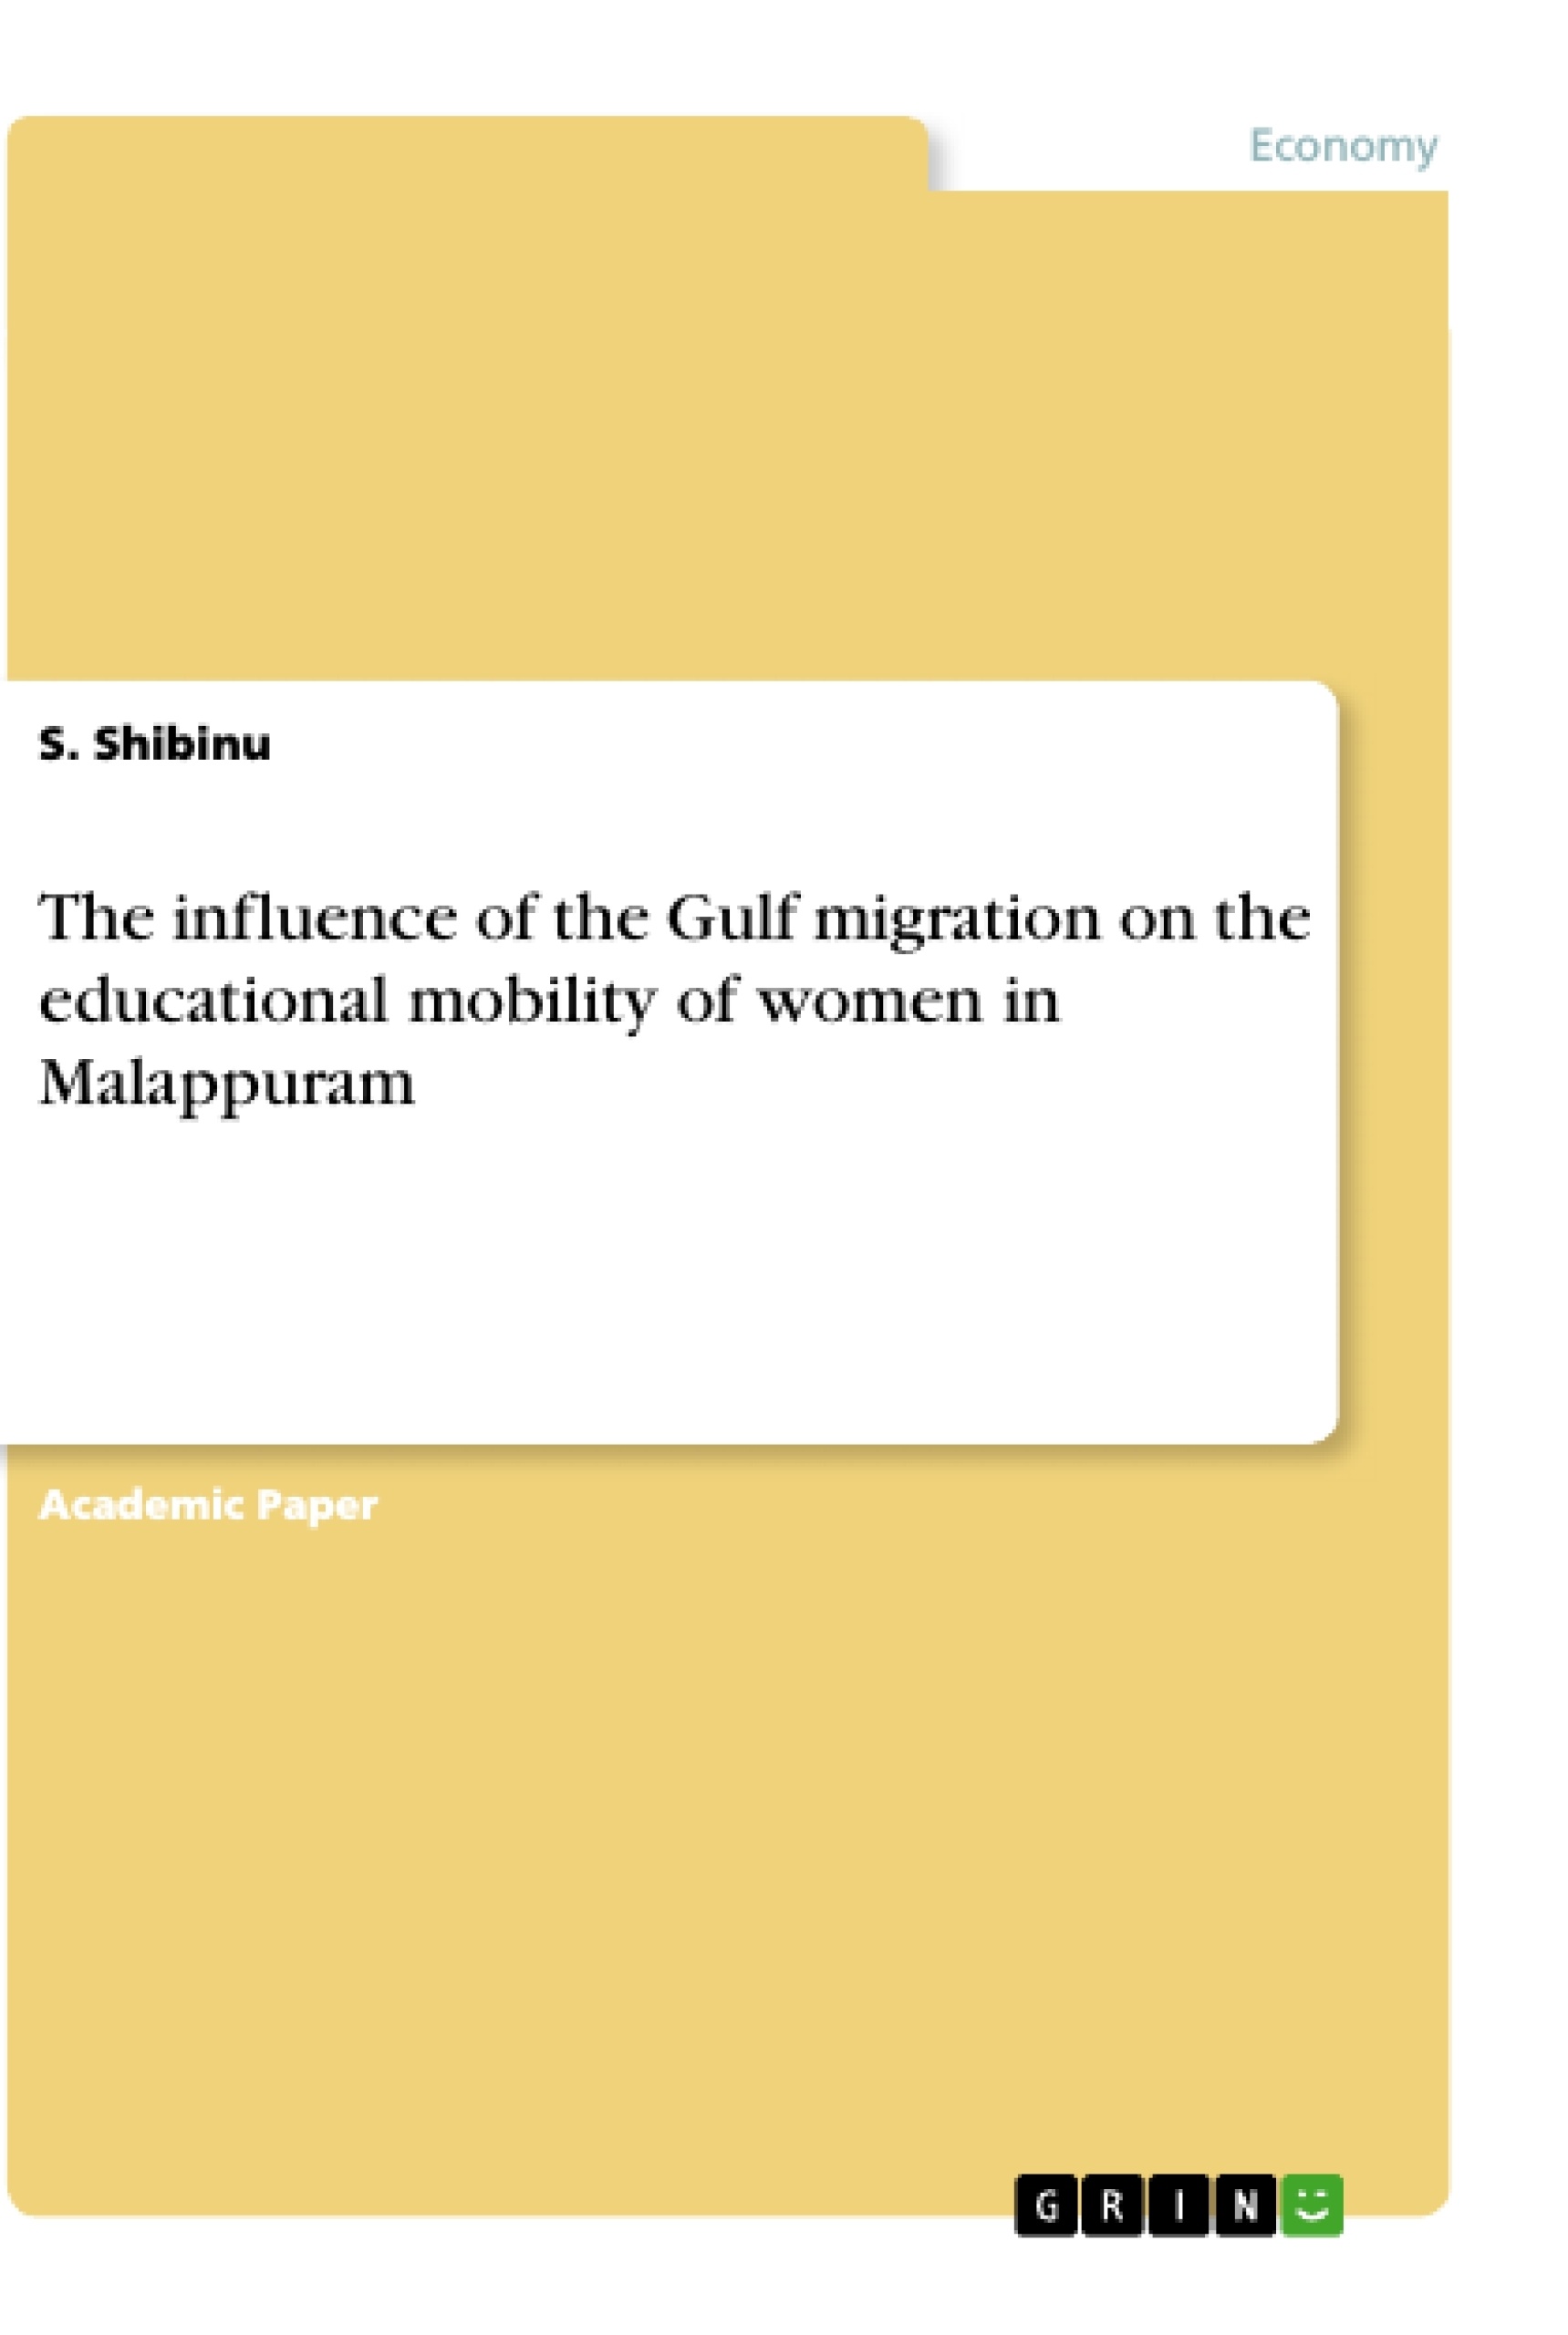 Titre: The influence of the Gulf migration on the educational mobility of women in Malappuram